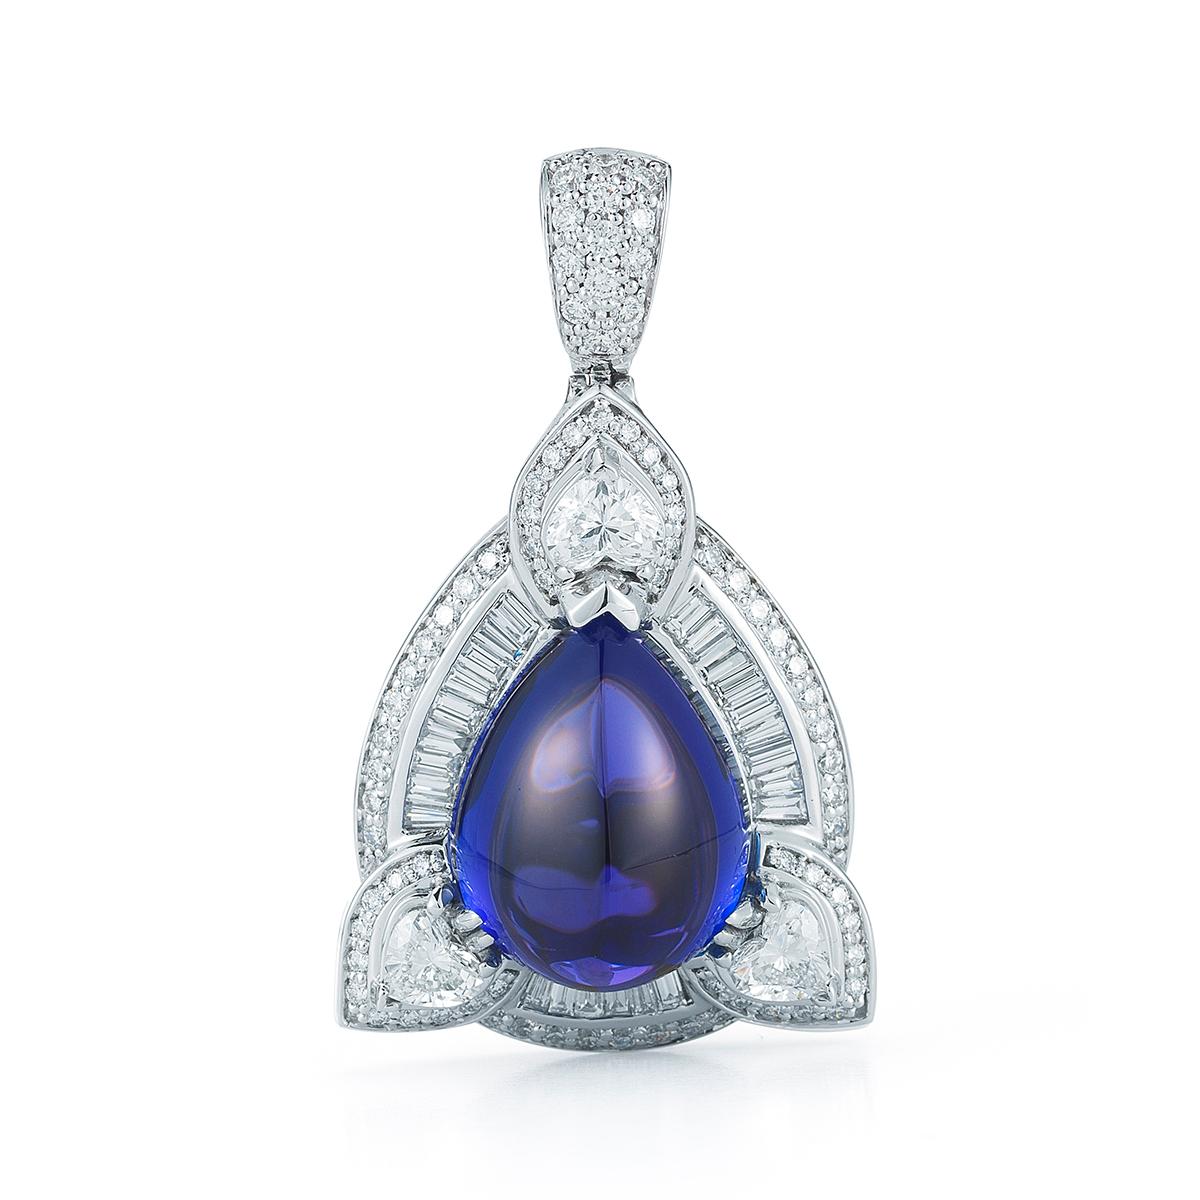 TANZANITE PEAR CABOCHON PENDANT BY RAYAZTAKAT
A celebratory setting fit for this exceptional pear shape Tanzanite. A fabulous look with diamond studs or the matching earrings.
Item:	# 01699
Setting:	18K W
Lab:	C.Dunaigre
Color Weight:	23.05 ct. of